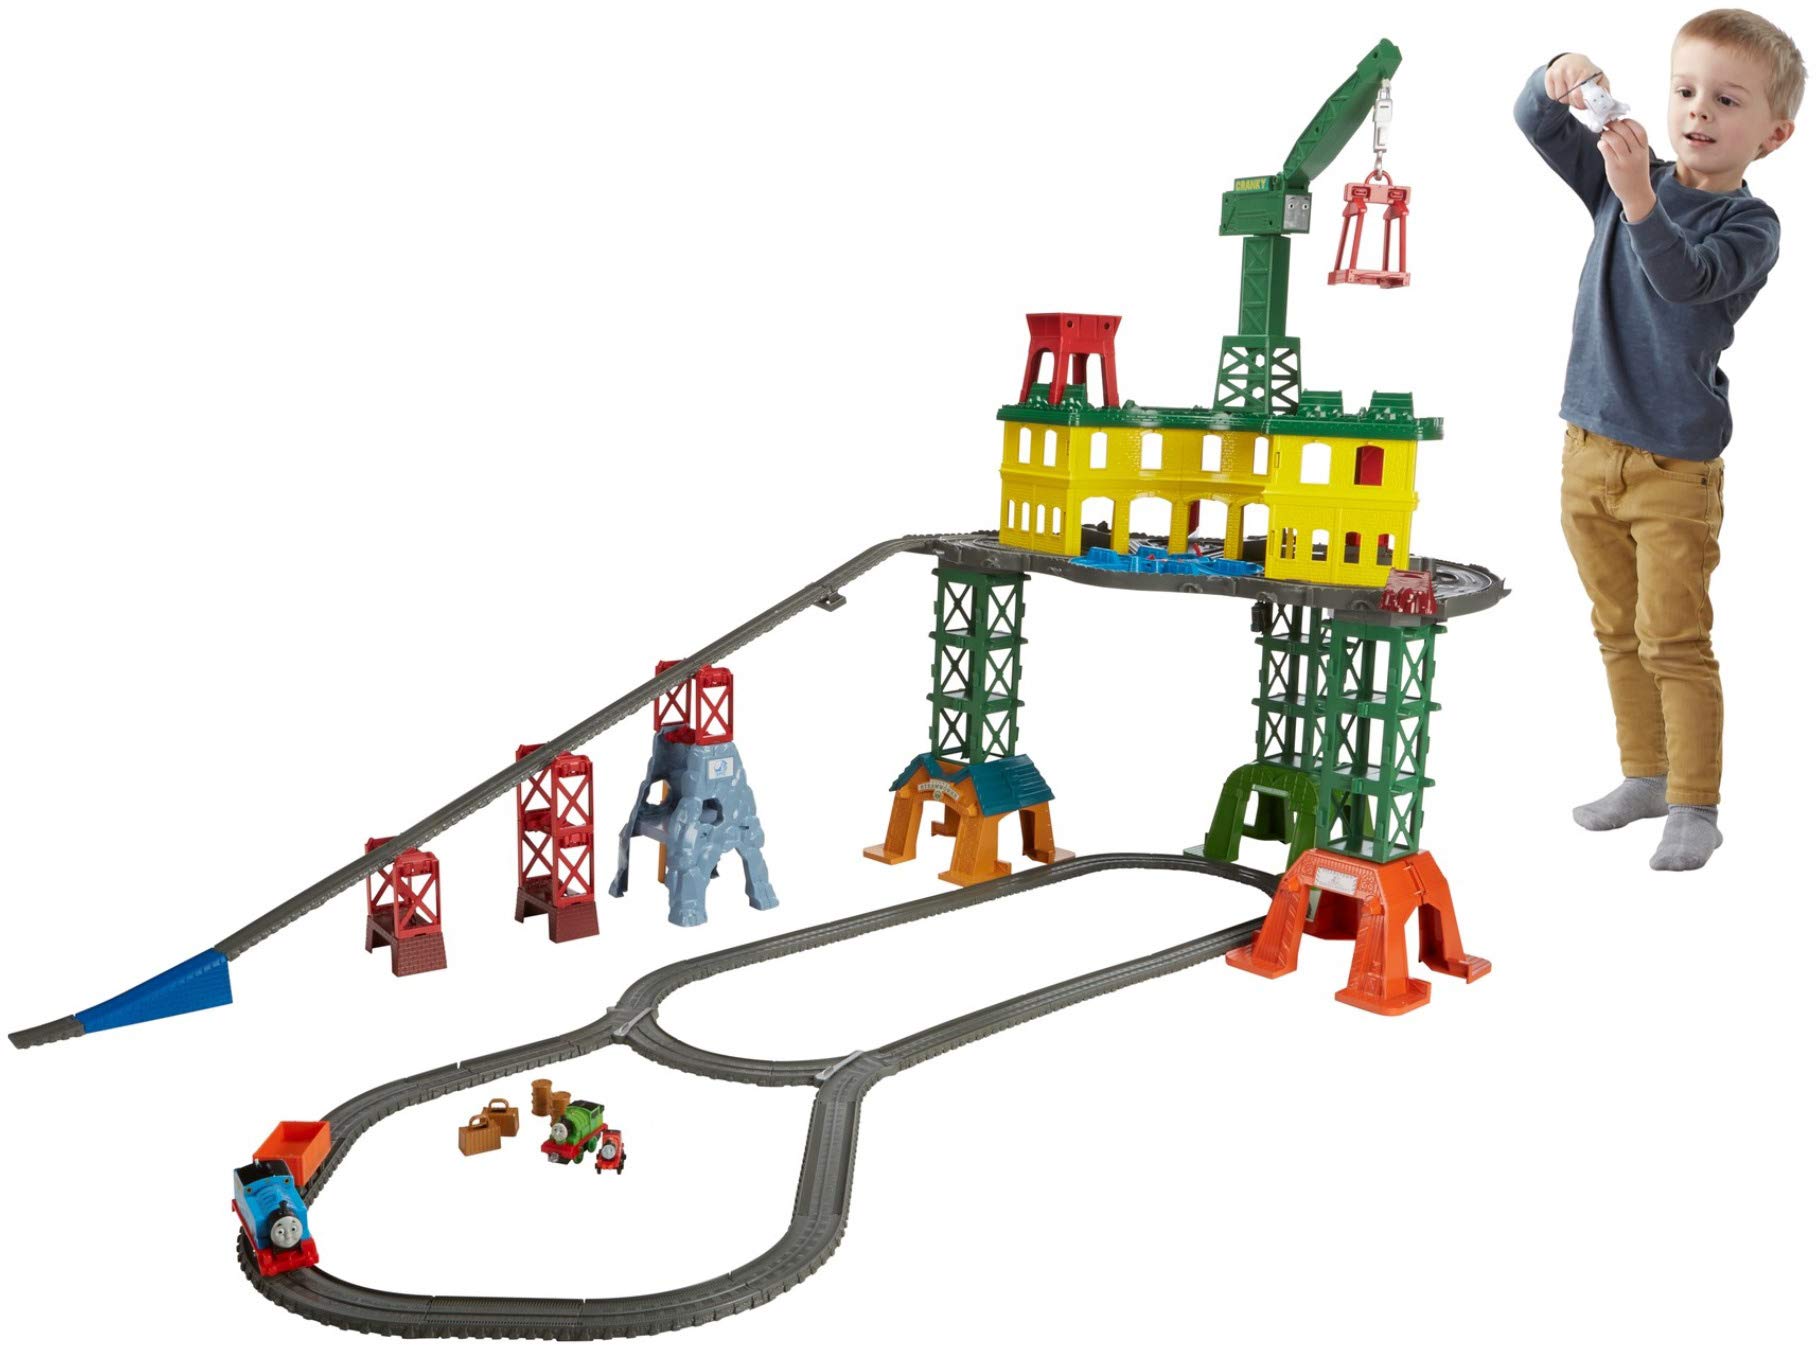 Thomas & Friends Super Station Extra Large Train Set w/ Reconfigurable Race Track $62.04 + Free Shipping